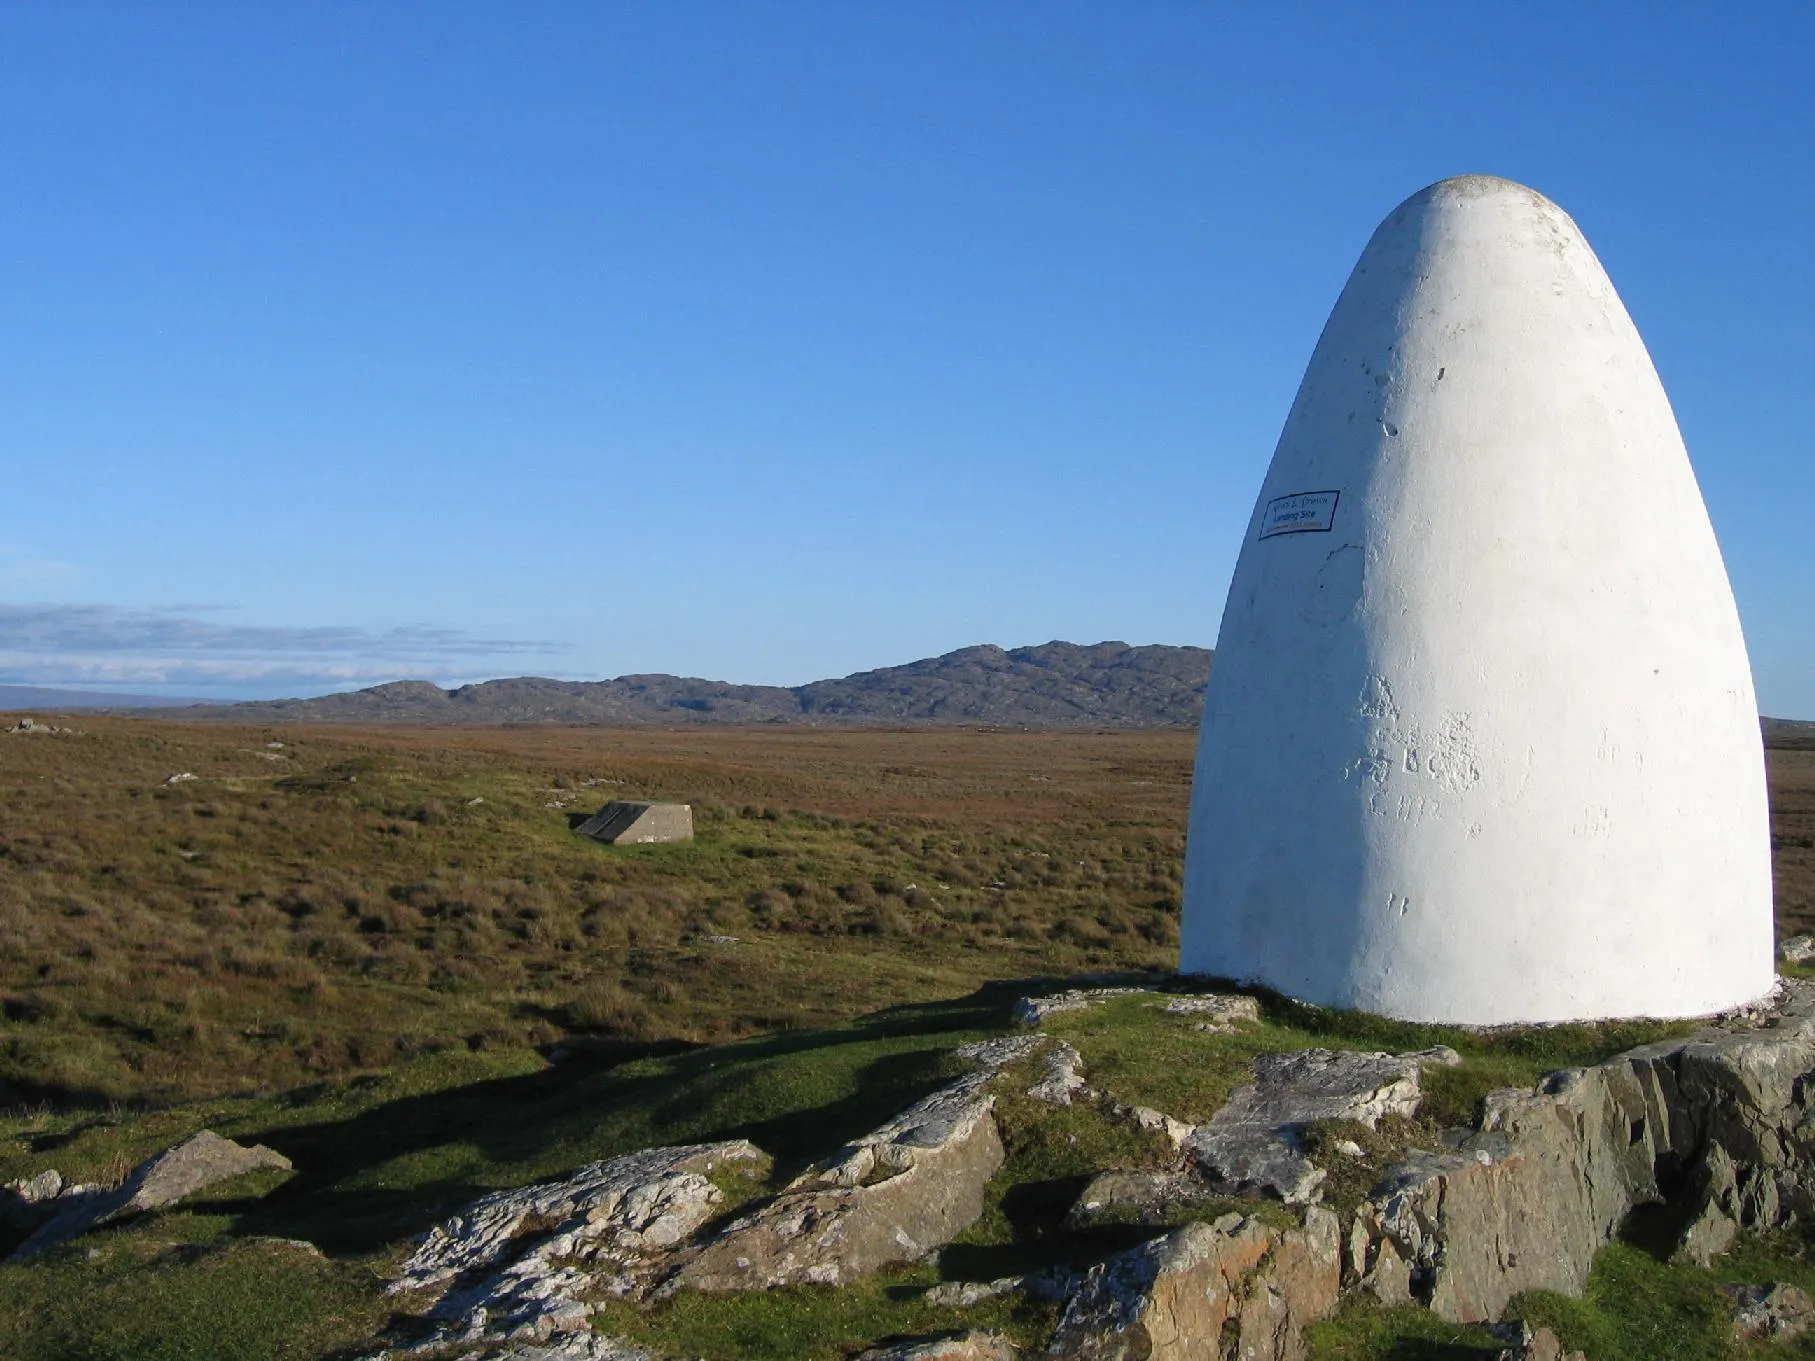 Photo showing: The landing site of the pioneering transatlantic flight of Alcock and Brown, and adjacent memorial cairn.  The first non-stop transatlantic flight crash-landed four kilometres south of Clifden, County Galway, Ireland on June 15 1919. There is a memorial cairn around four metres in height on the site of Marconi's first transatlantic wireless station, five hundred metres from the crash site. The inscription on the cairn reads "Alcock and Brown, landing site, 500 meters" with an arrow pointing towards the bog in the centre of the picture.